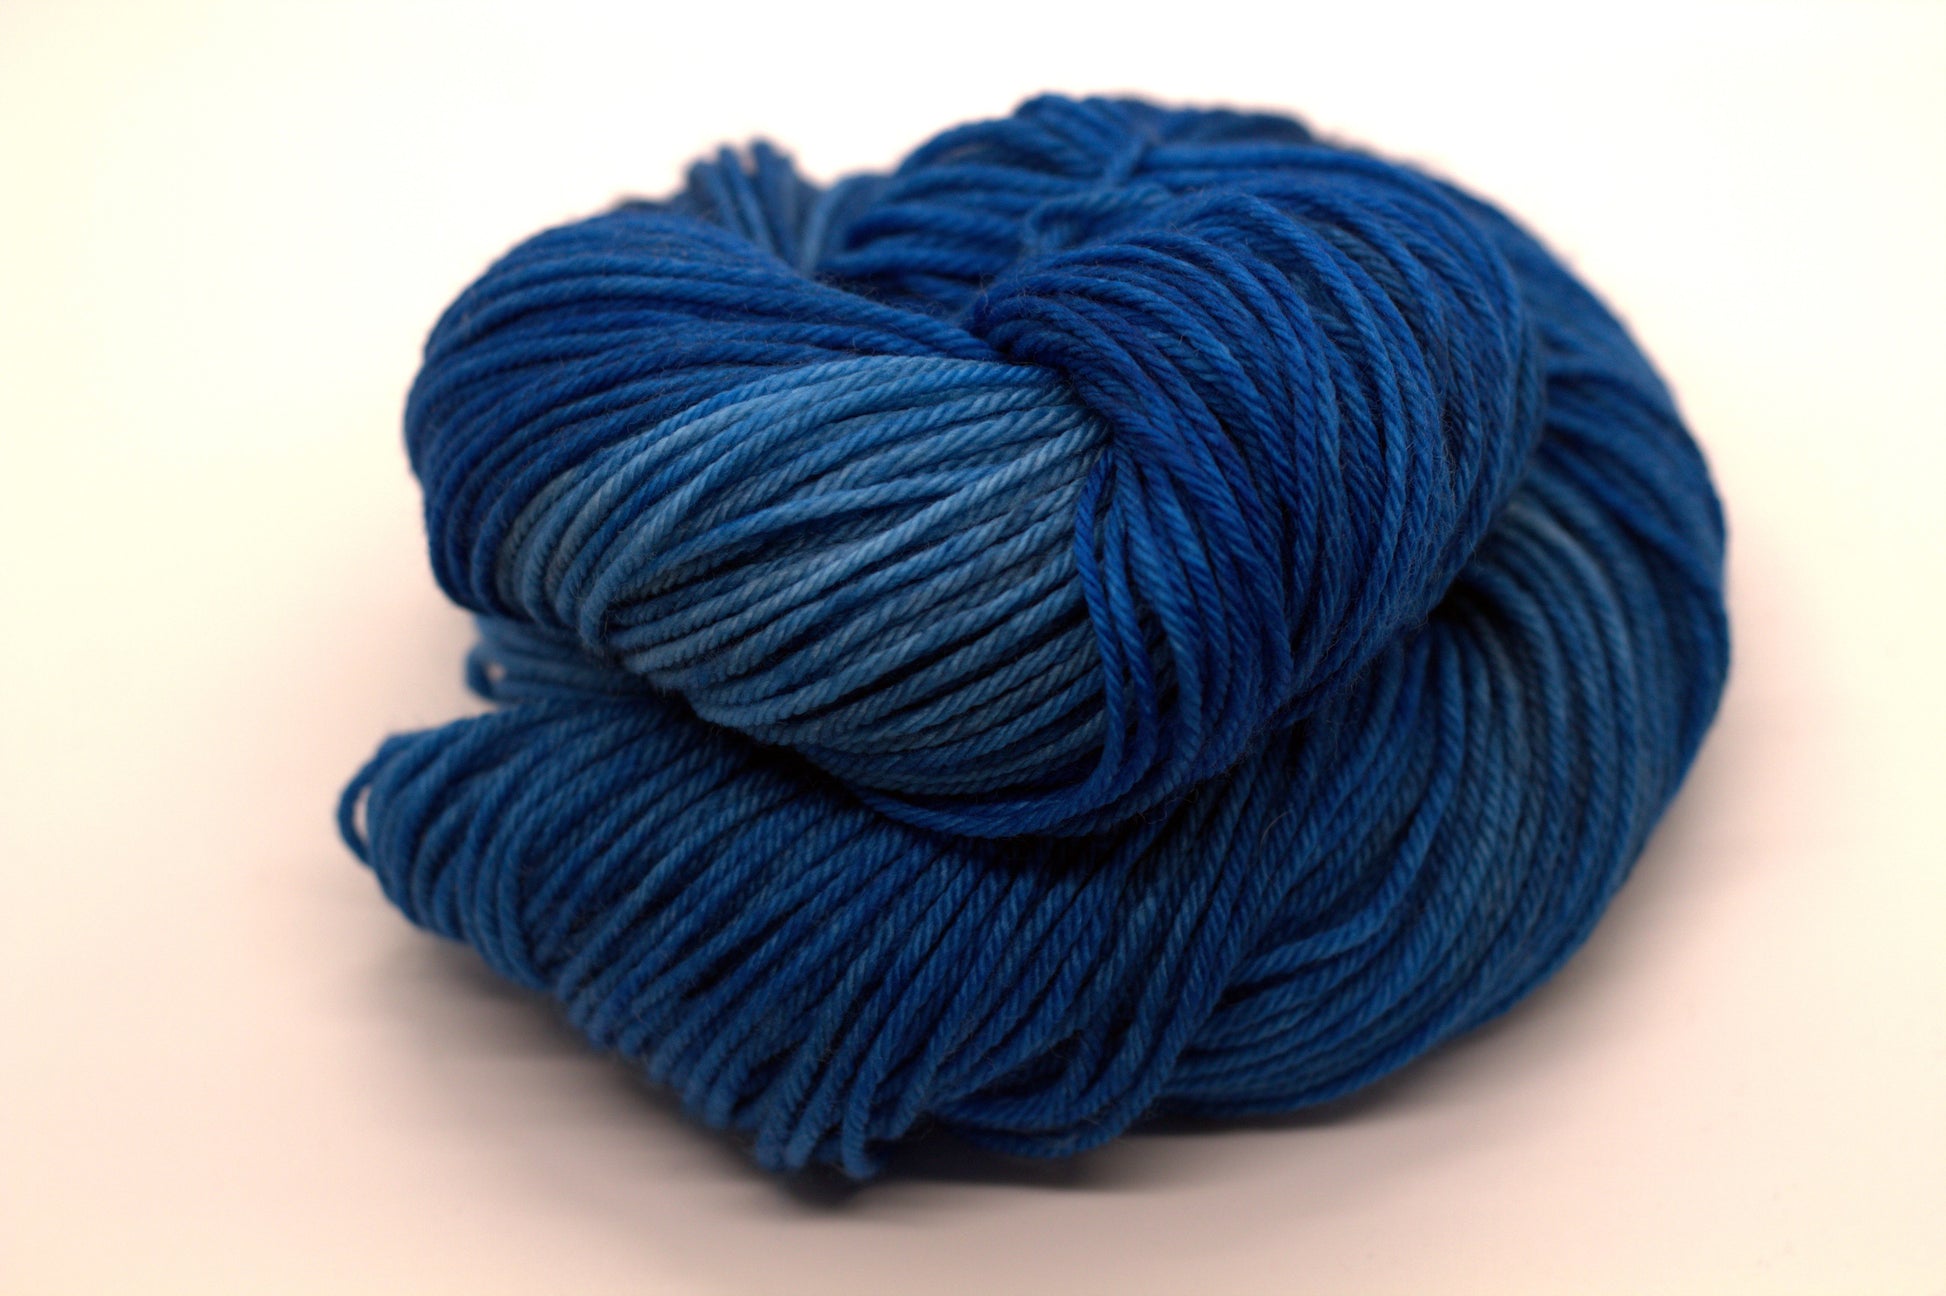 one curled skein tonal peacock blue yarn on white background.